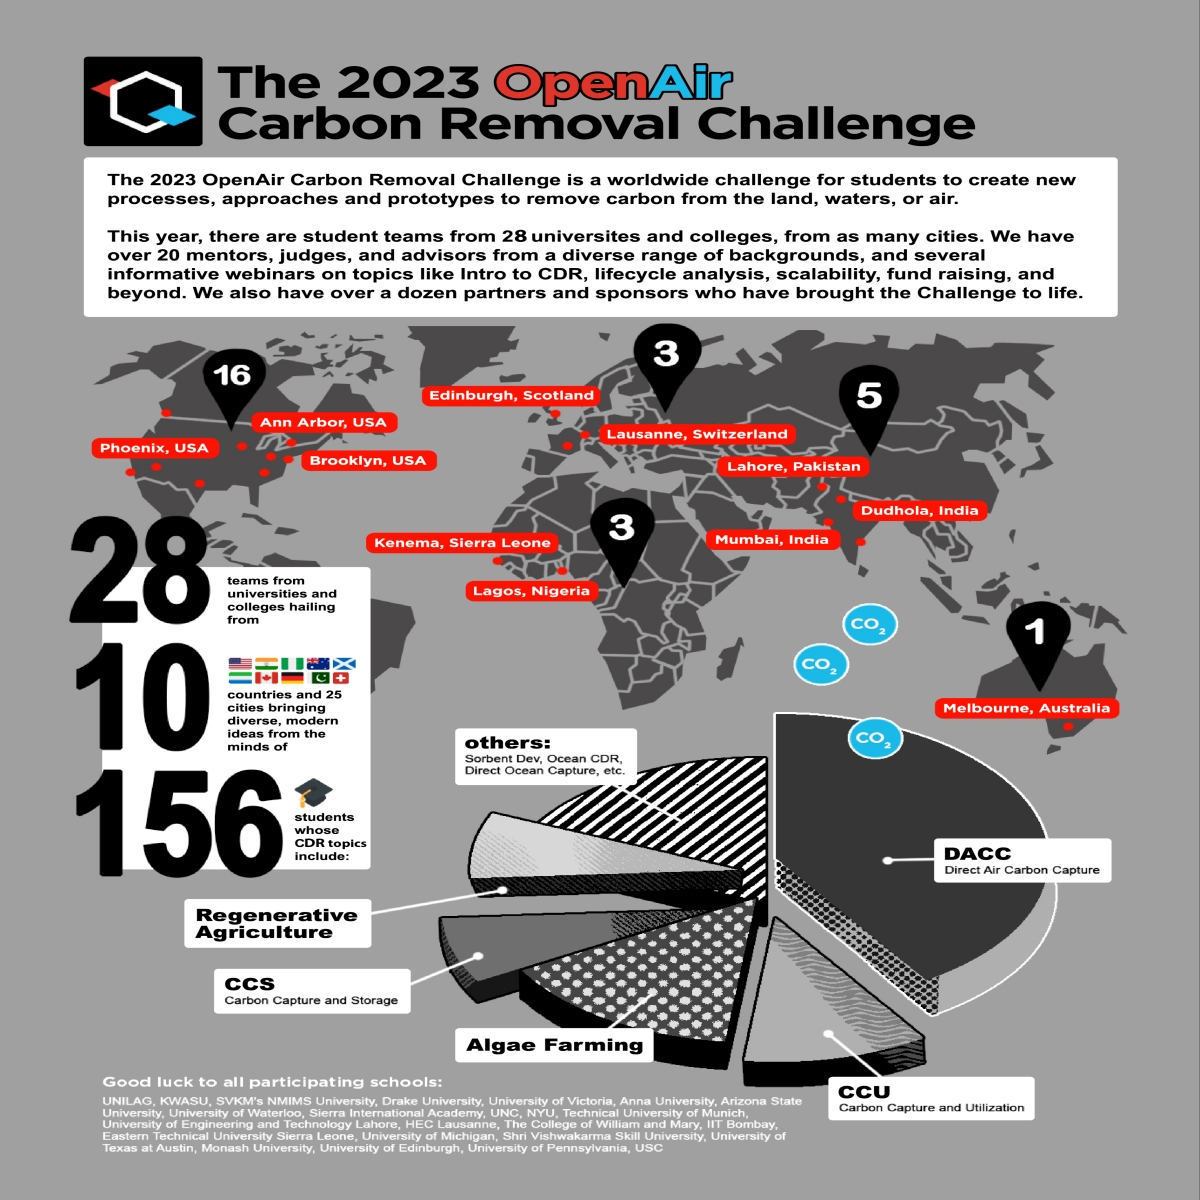 Flyer of the event with text with data visuals and the following text "The 2023 OpenAir Carbon Removal Challenge is a worldwide challenge for students to create new processes, approaches and prototypes to remove carbon from the land, waters, or air. This year, there are student teams from 28 universites and colleges, from as many cities. We have over 20 mentors, judges, and advisors from a diverse range of backgrounds, and several informative webinars on topics like Intro to CDR, lifecycle analysis, scalability, fund raising, and beyond. We also have over a dozen partners and sponsors who have brought the Challenge to life."